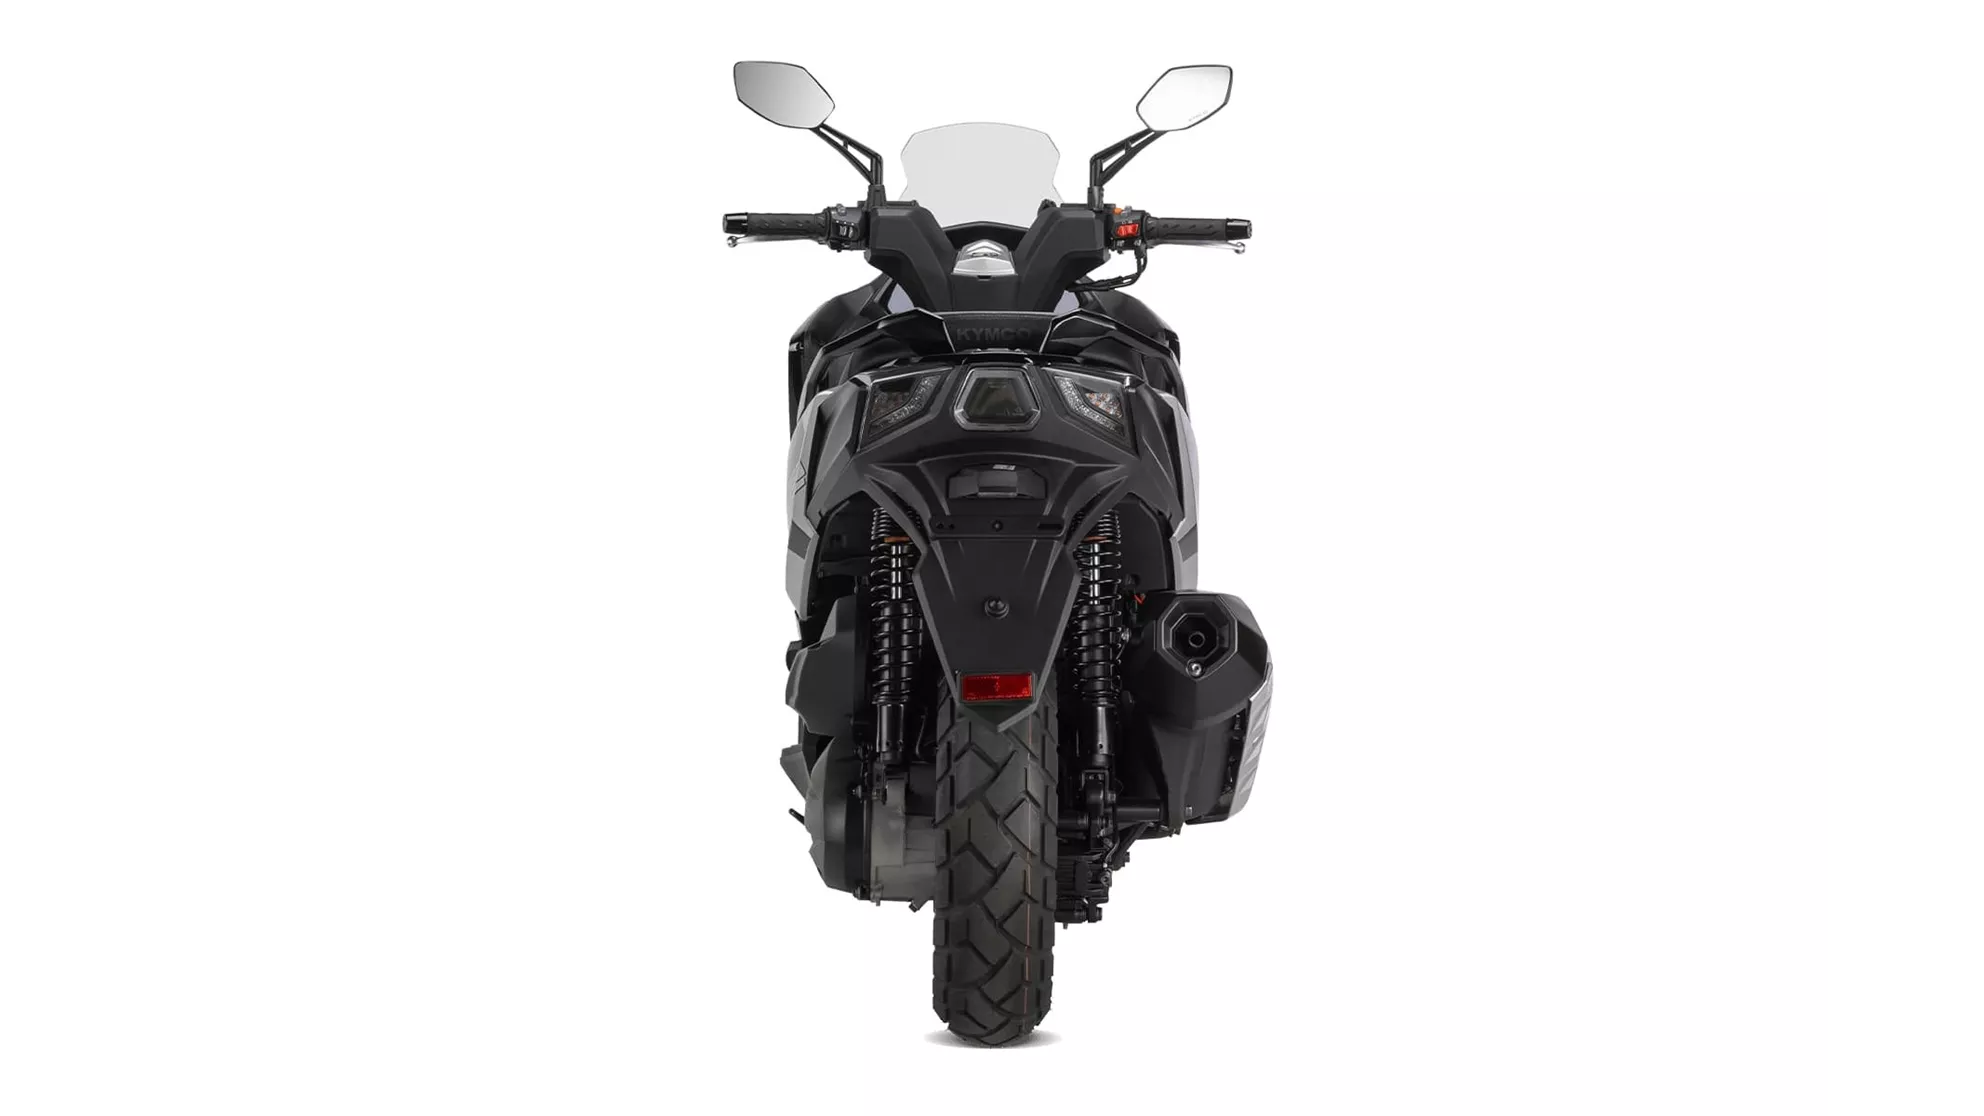 Kymco DT X 125i ABS - Image 3